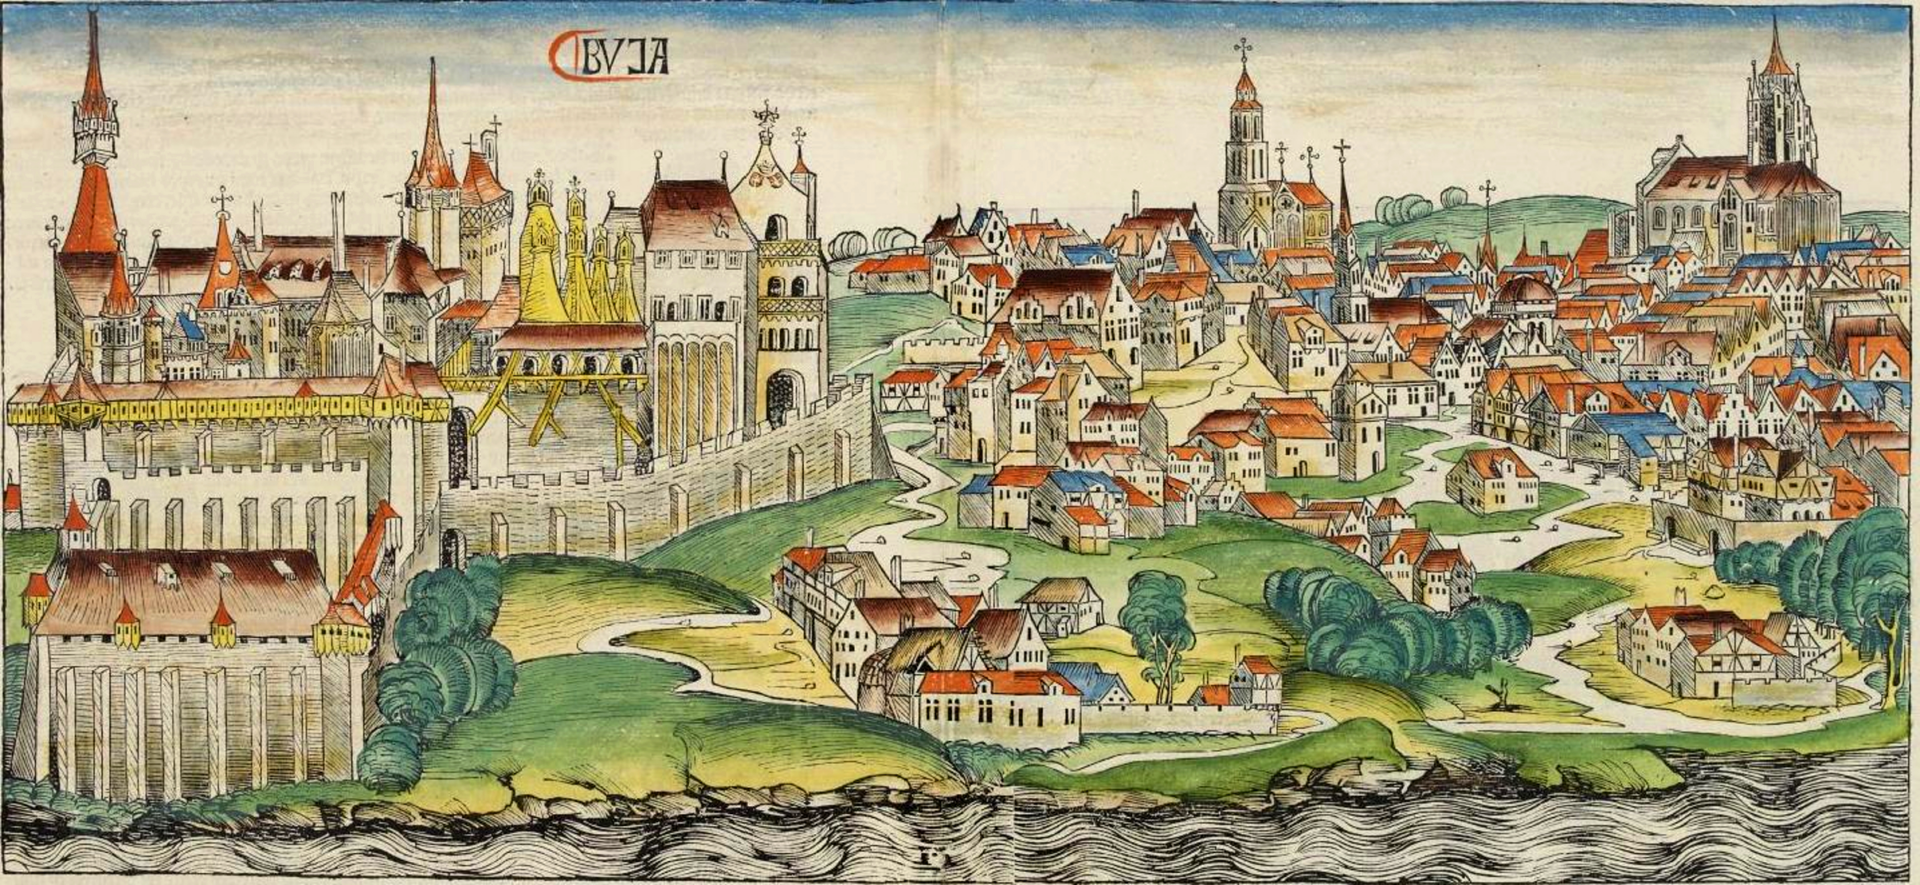 Buda during the Middle Ages